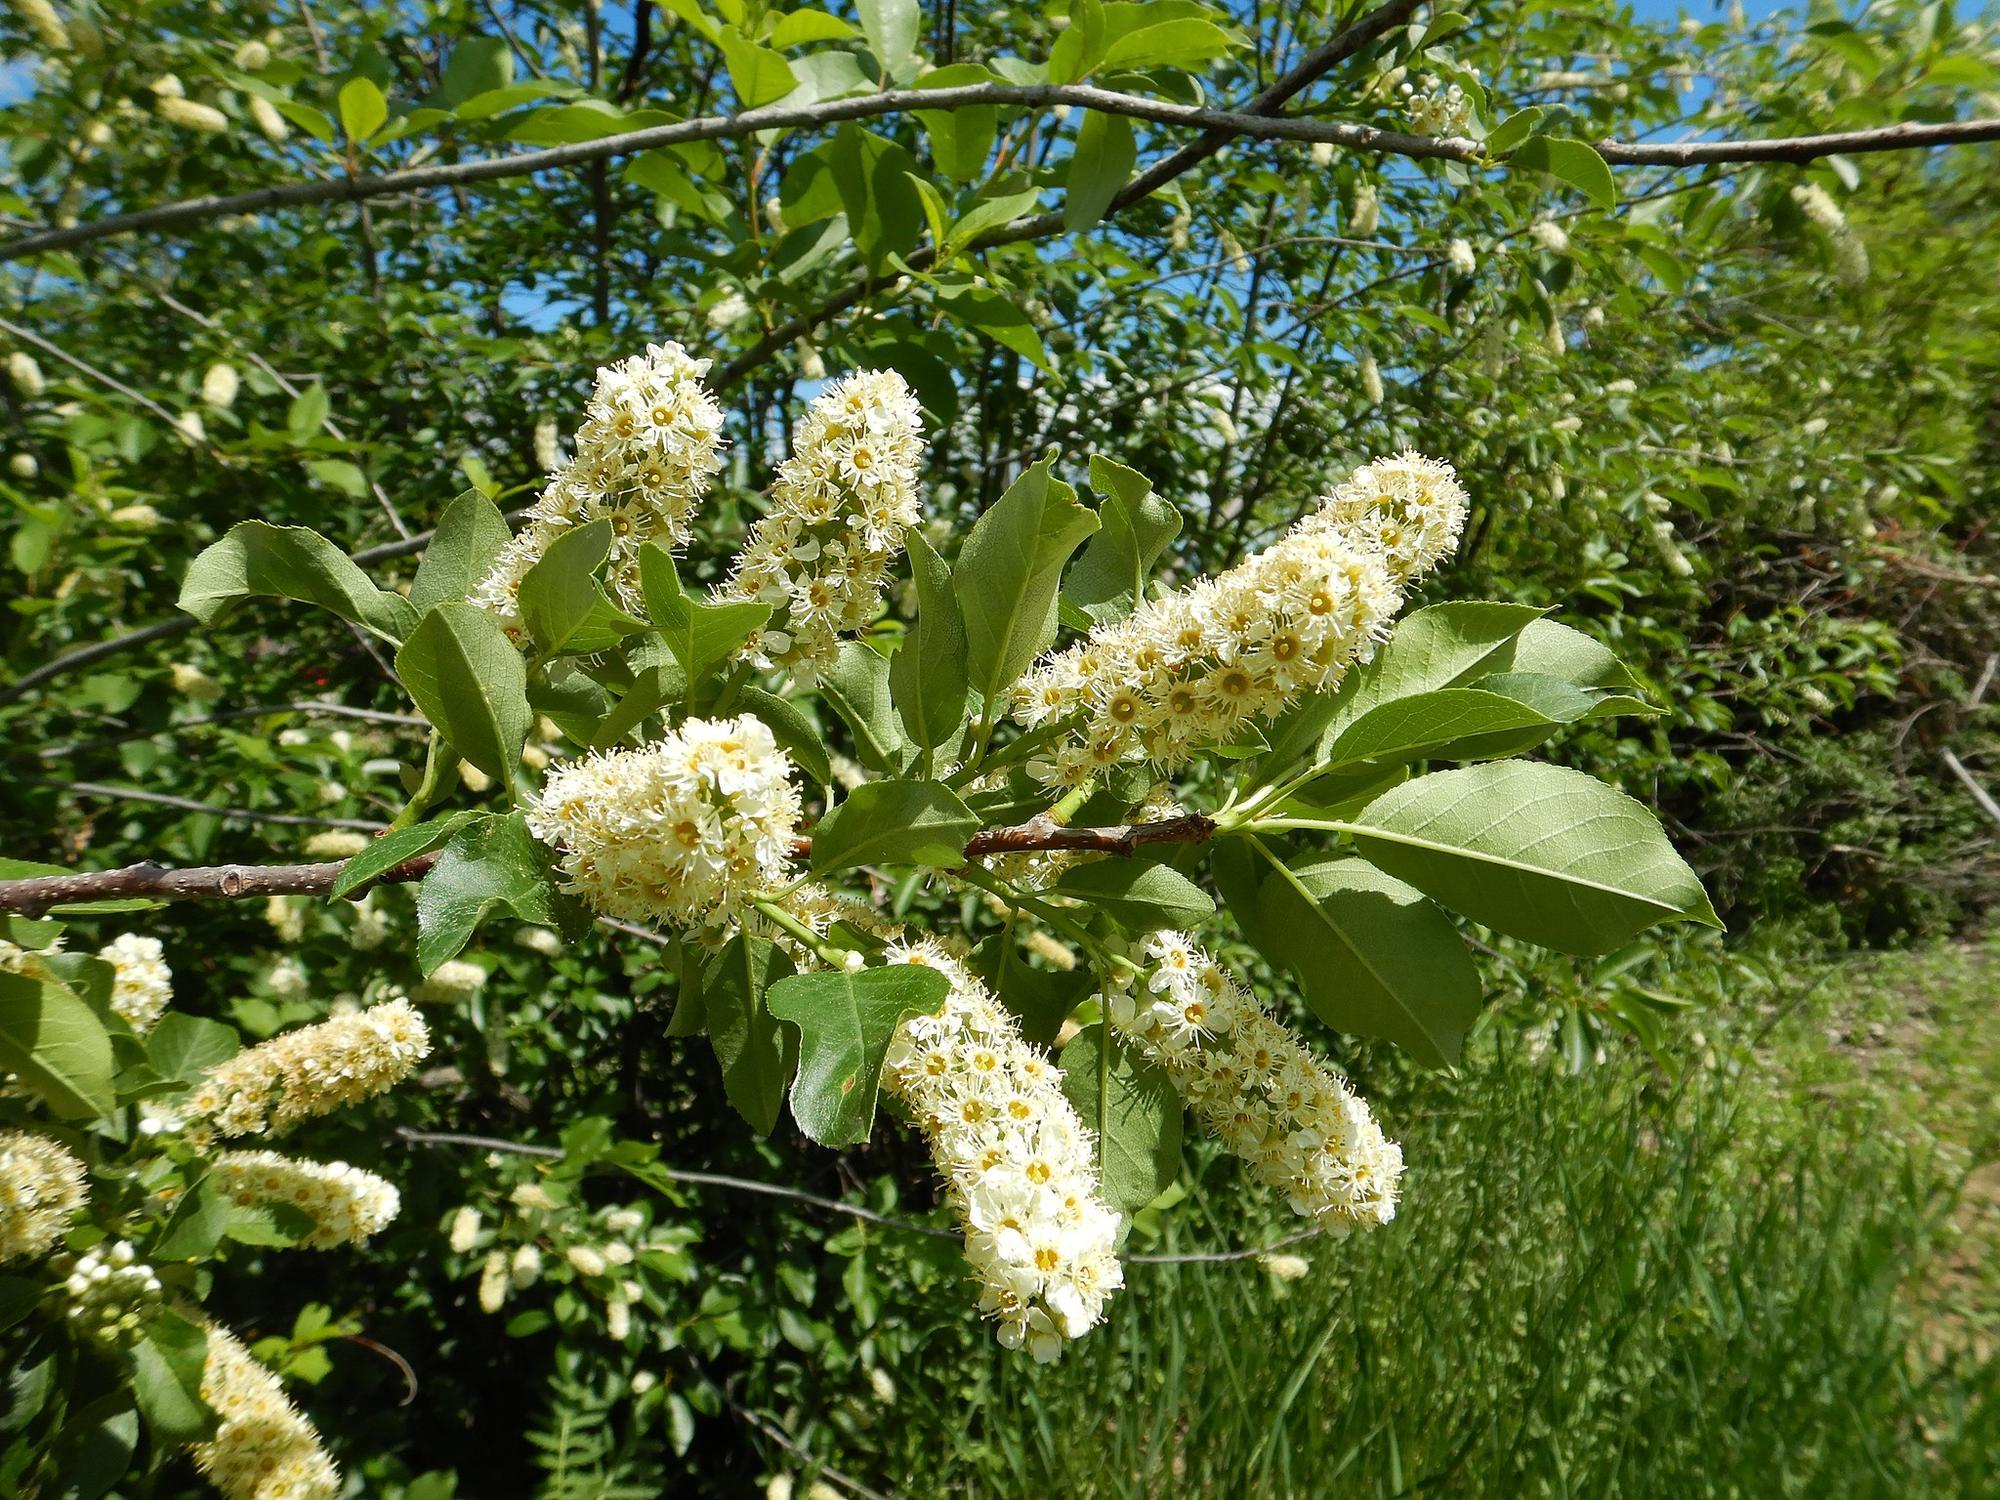 bush with cigar-shaped plumes or clusters of tiny white flowers